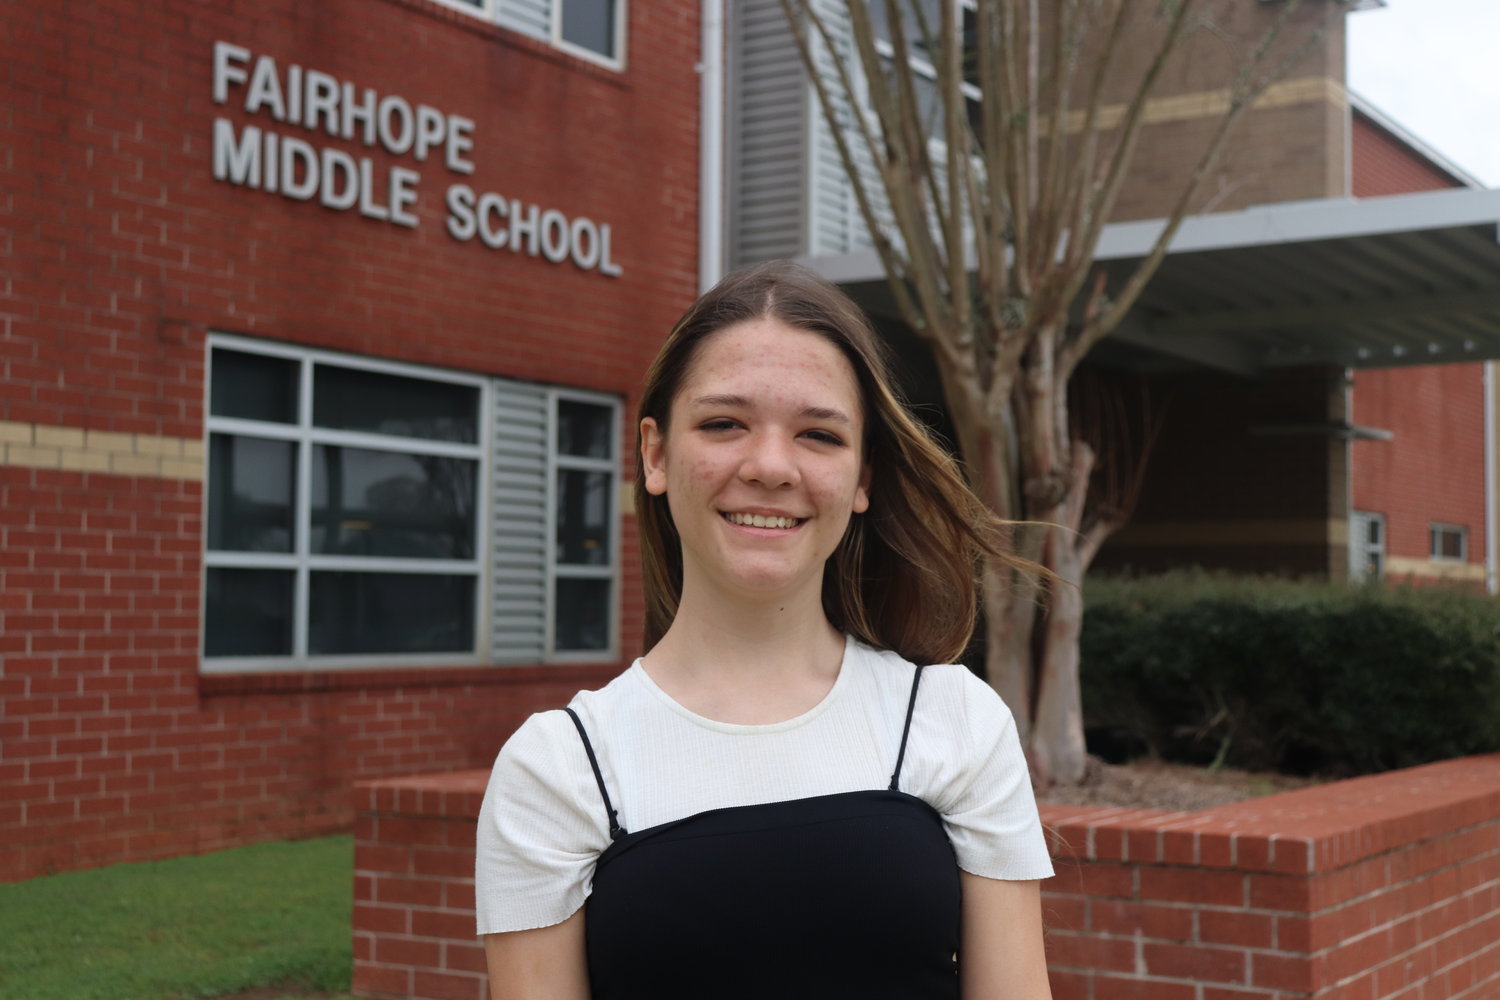 Fairhope Middle School seventh grader Taylor Scott will compete in the Alabama State Spelling Bee on March 18 in Birmingham